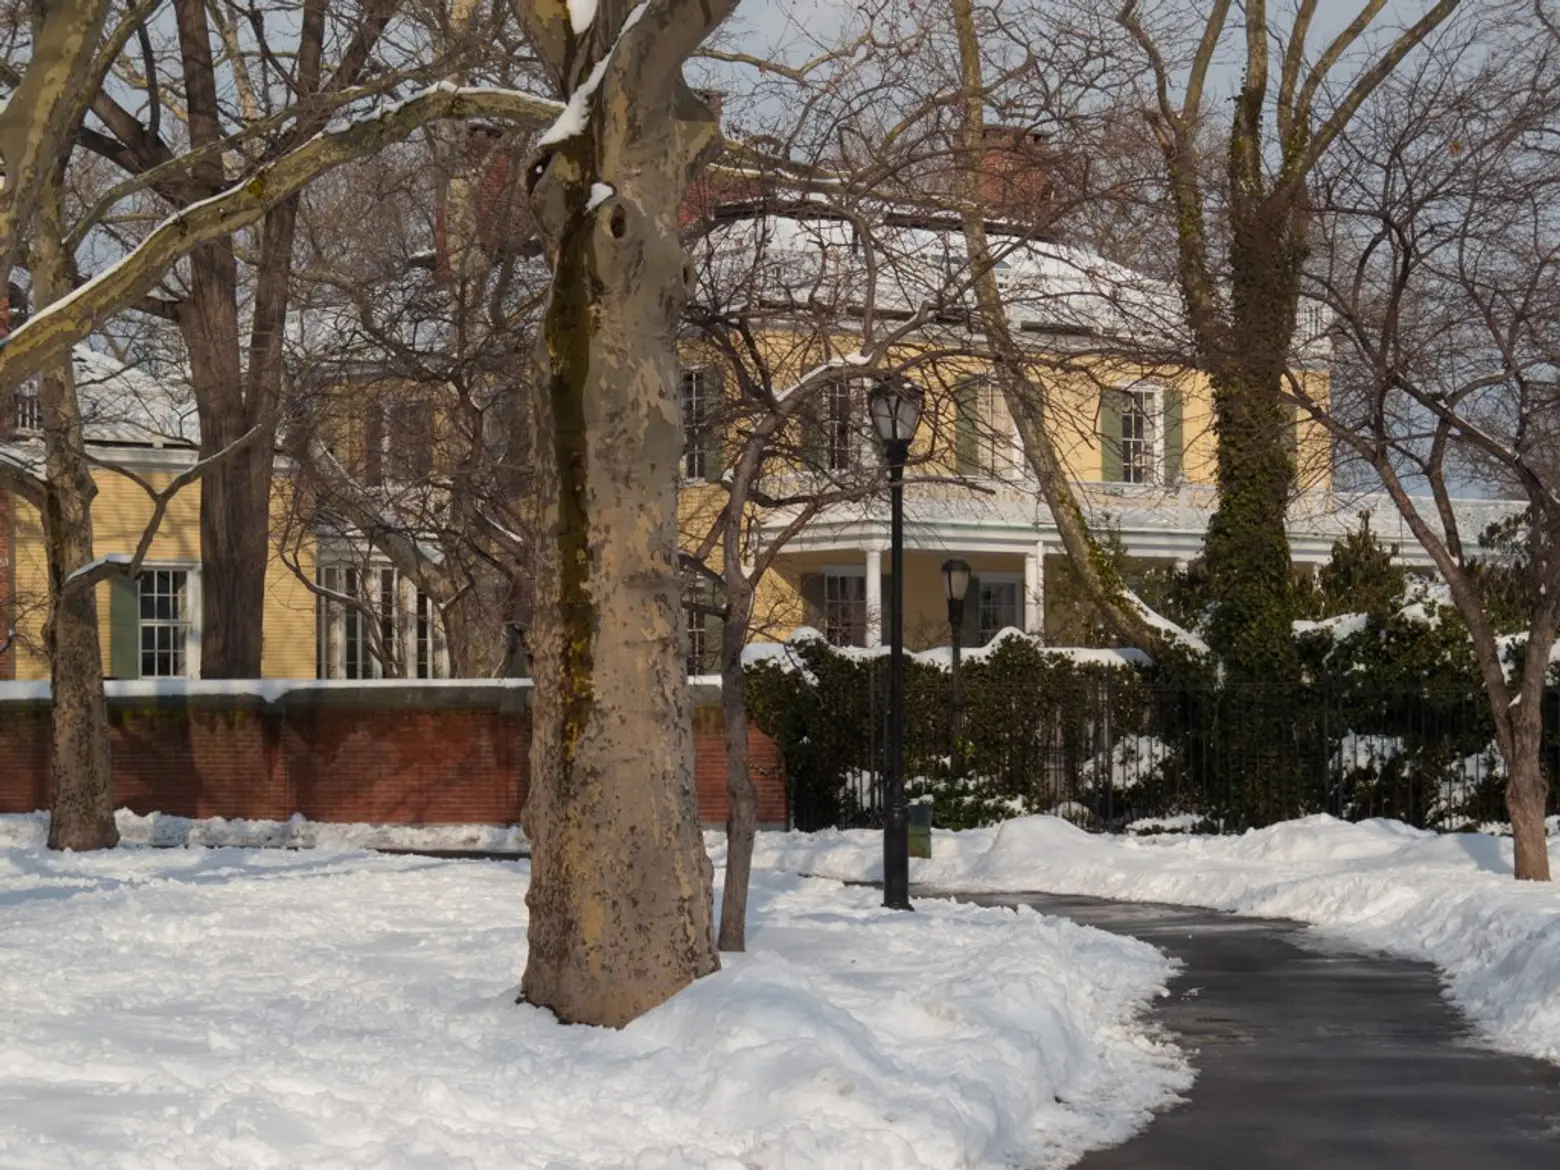 Mayor De Blasio Builds a “Privacy Fence” Around Gracie Mansion to Keep Curious Eyes Out